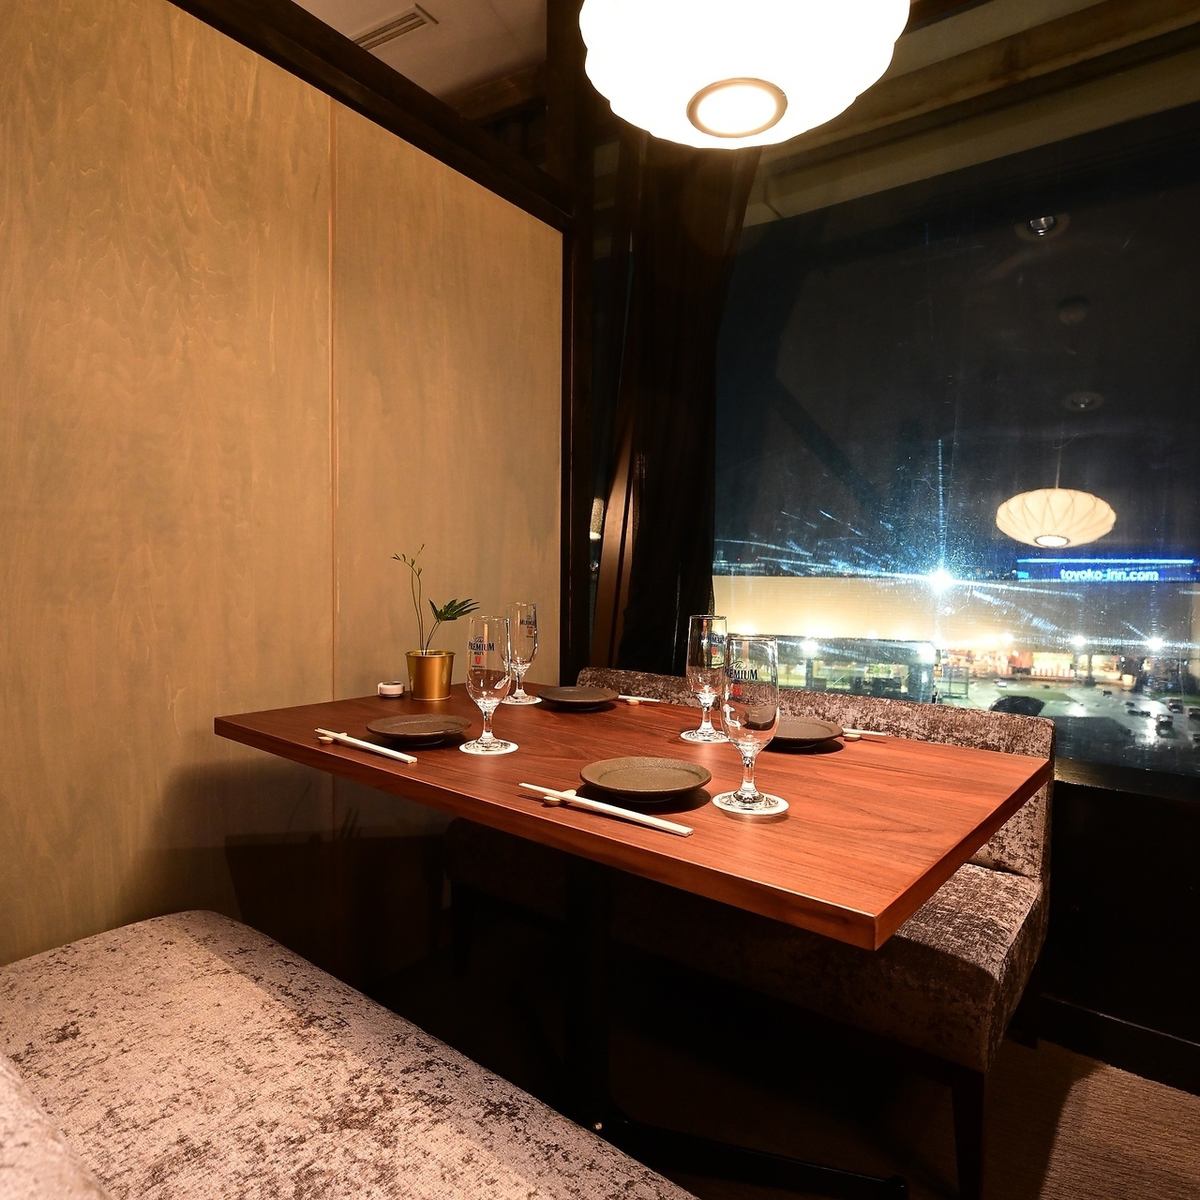 ◇ Completely private room ◇ Overlooking the night view of Toyota ♪ Relax elegantly in a fashionable space